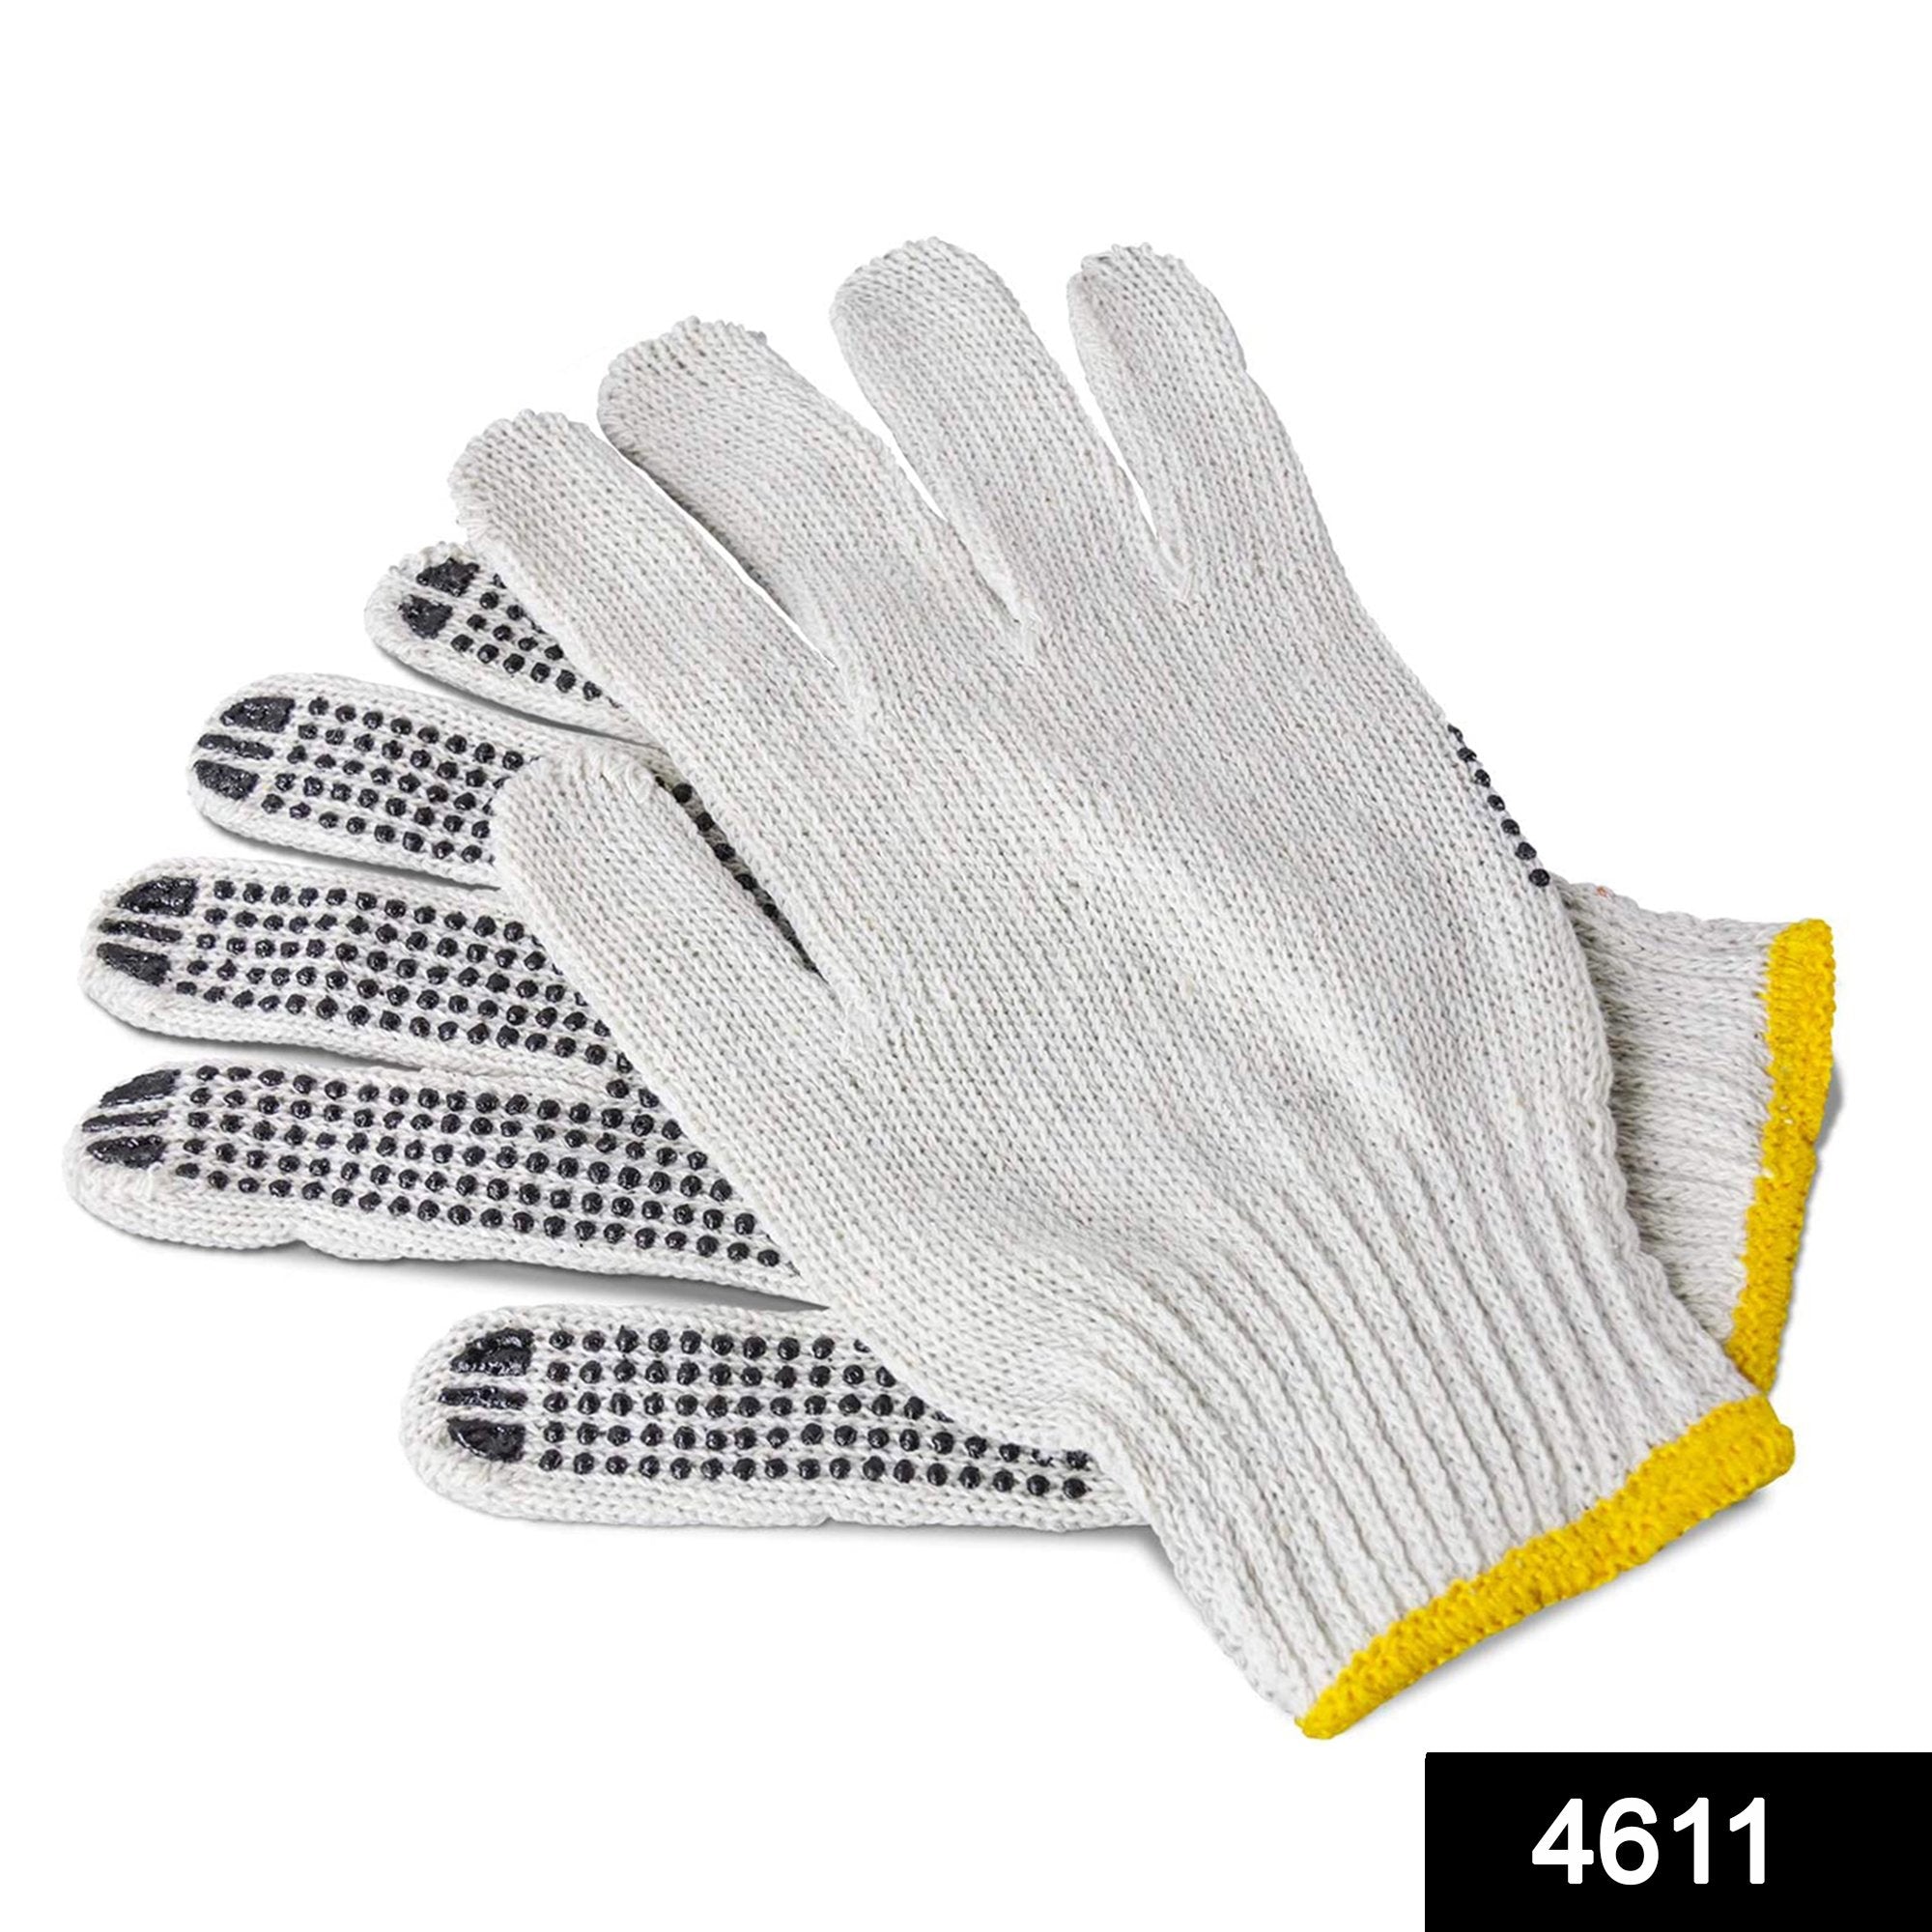 4611 Unisex Knitted/Sewing Cotton Plain Hand Gloves Raw White - SkyShopy